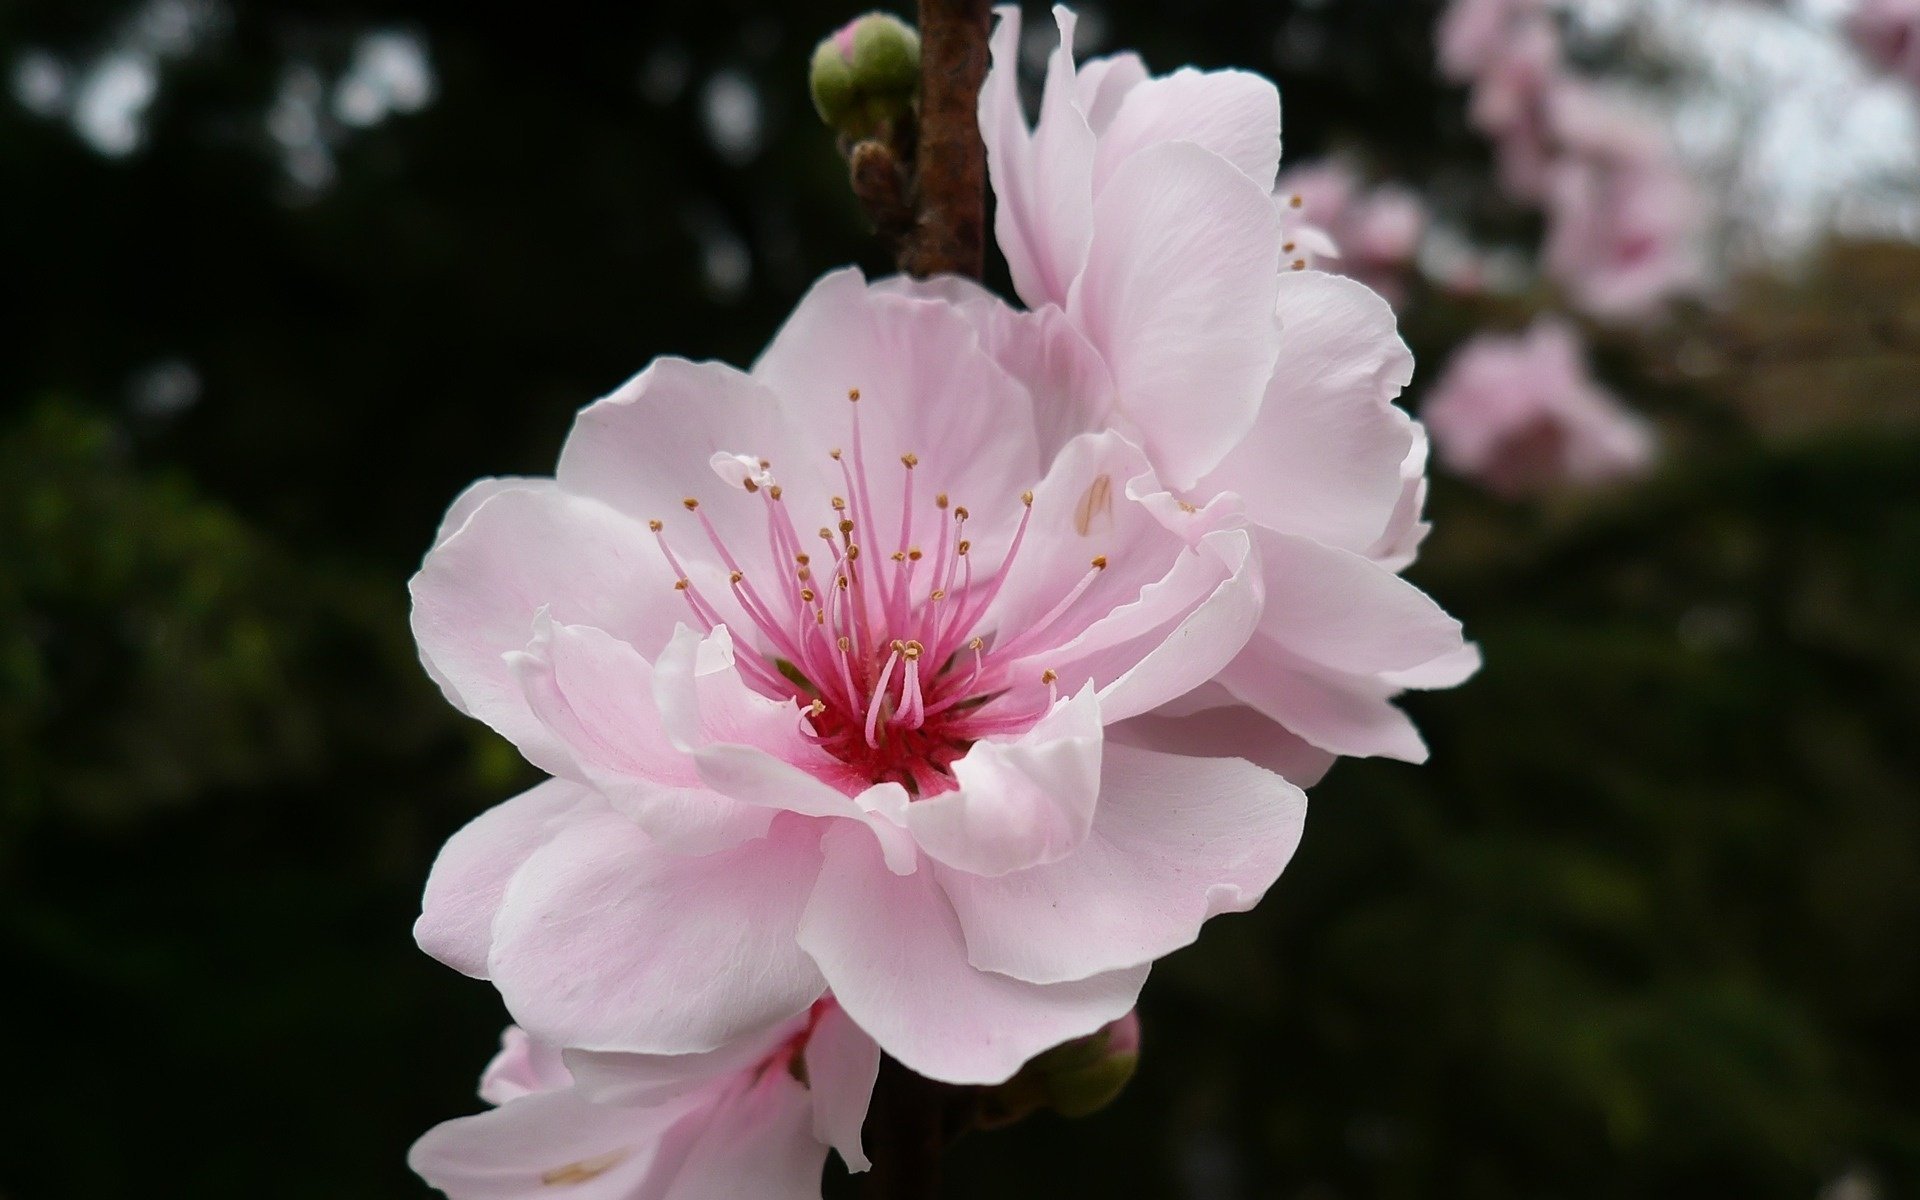 A pink cherry blossom is ripening on a branch